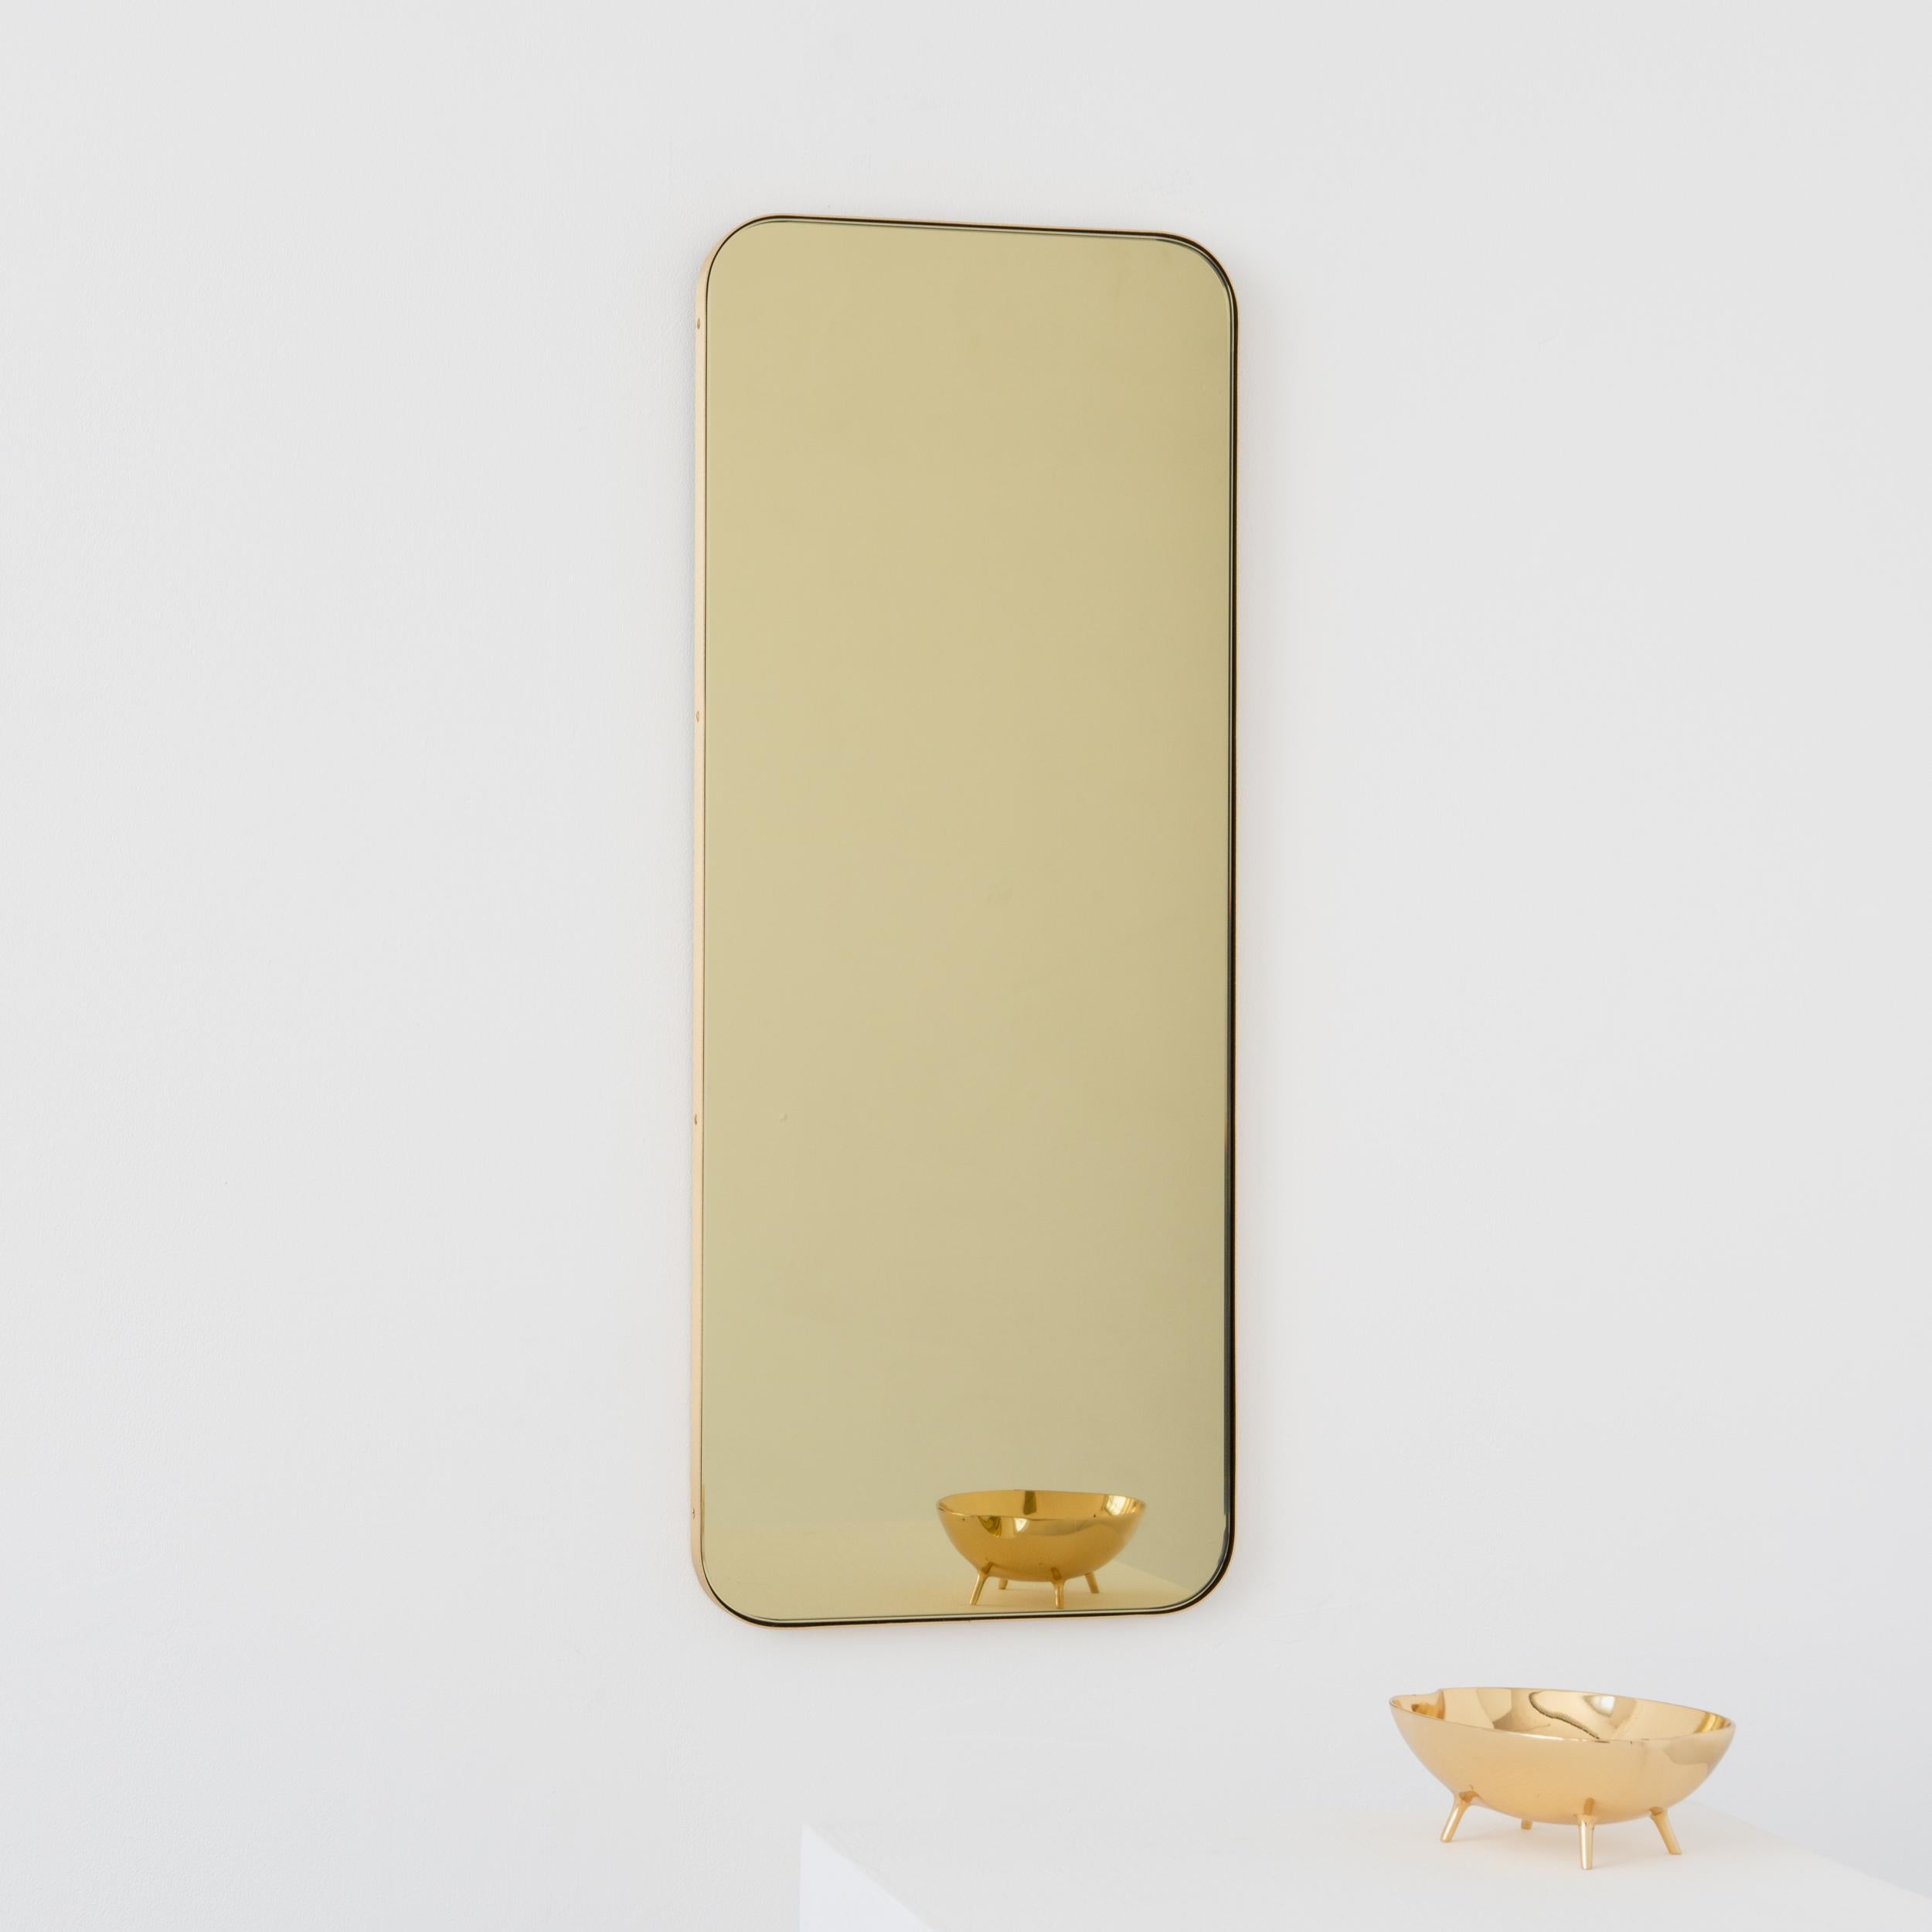 Modern gold tinted rectangular mirror with an elegant solid brushed brass frame. Part of the charming Quadris™ collection, designed and handcrafted in London, UK. 

Medium, large and extra-large (37cm x 56cm, 46cm x 71cm and 48cm x 97cm) mirrors are